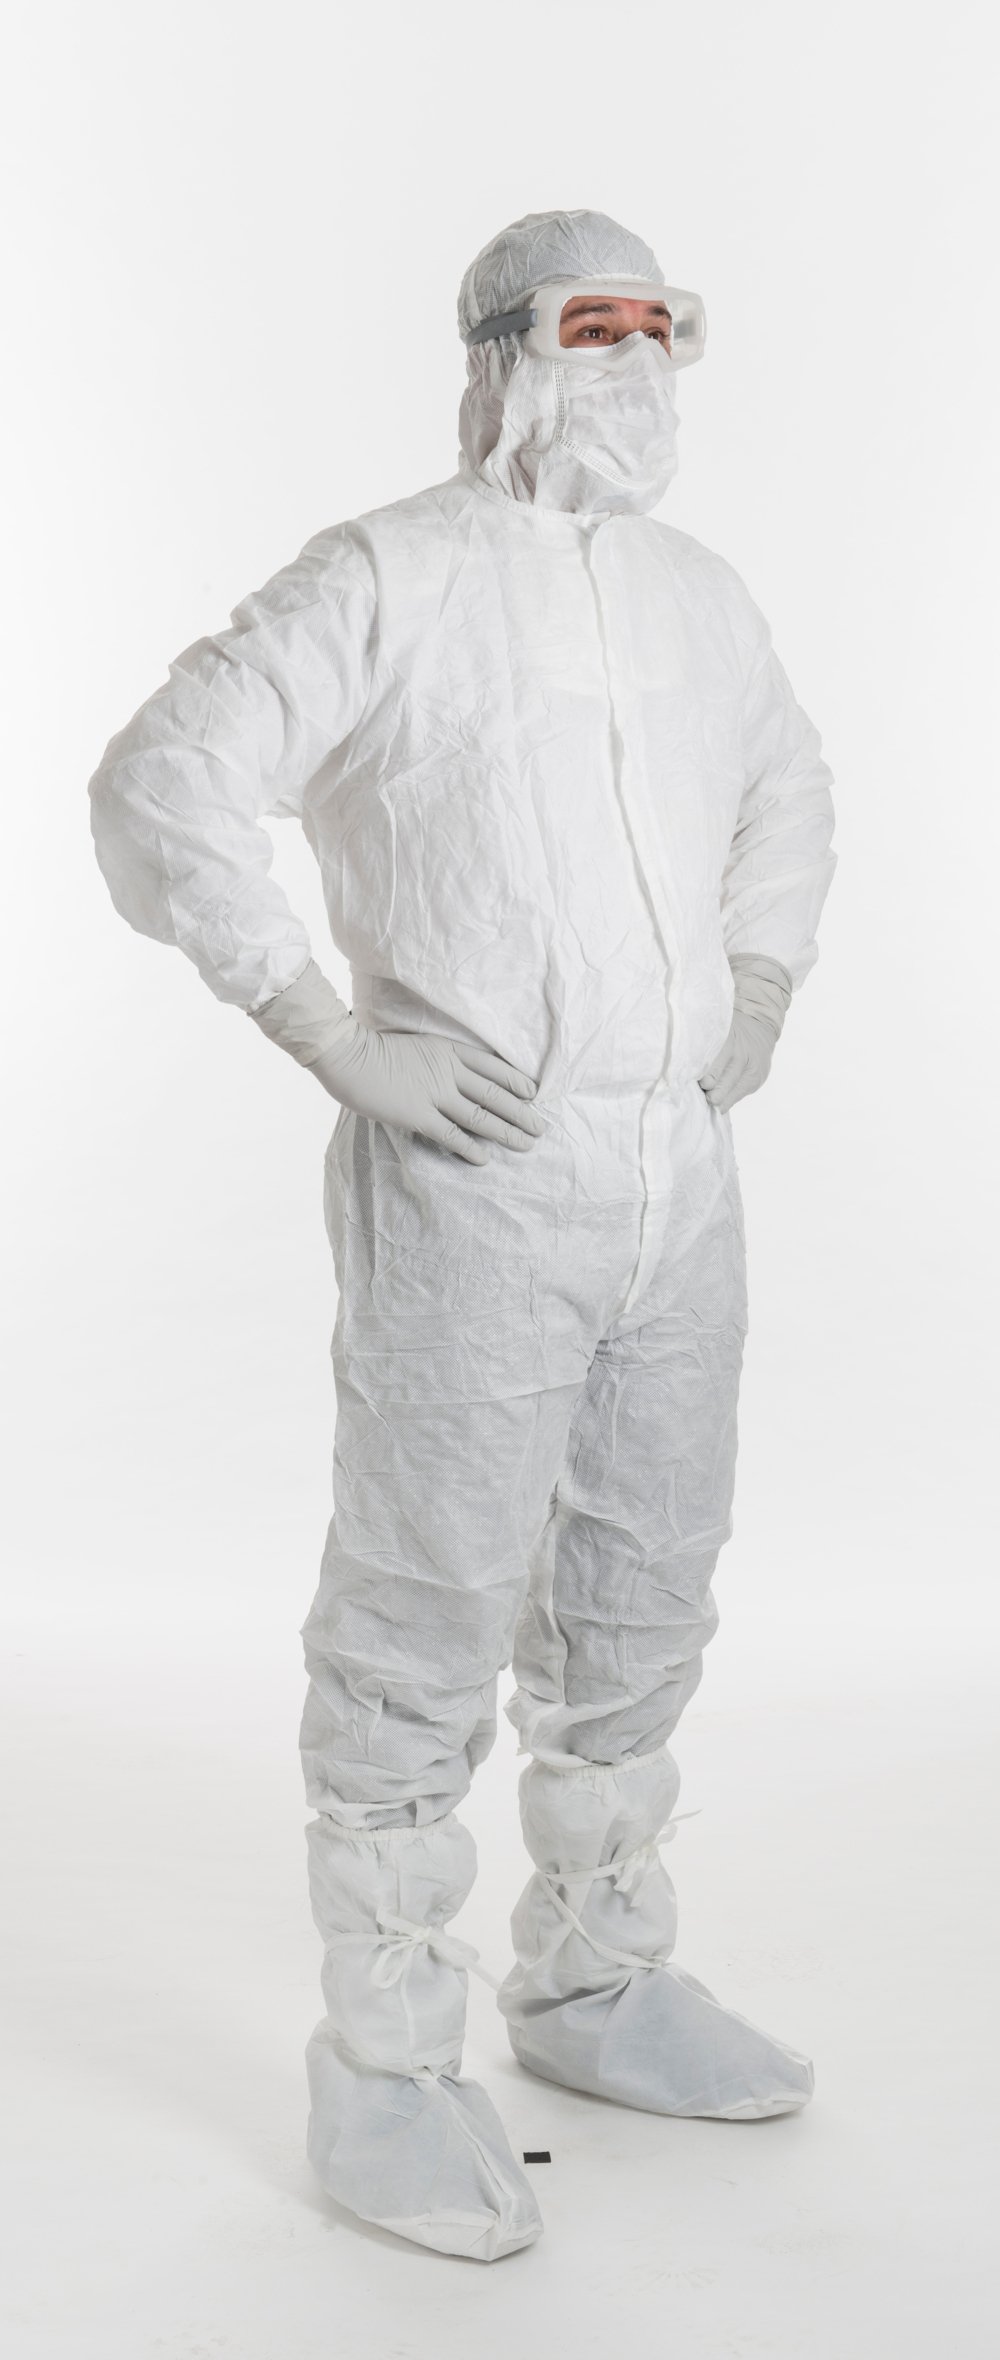 Kimtech™ A5 Sterile Cleanroom Apparel 88800 - White, S, 1x25 (25 total) - 88800